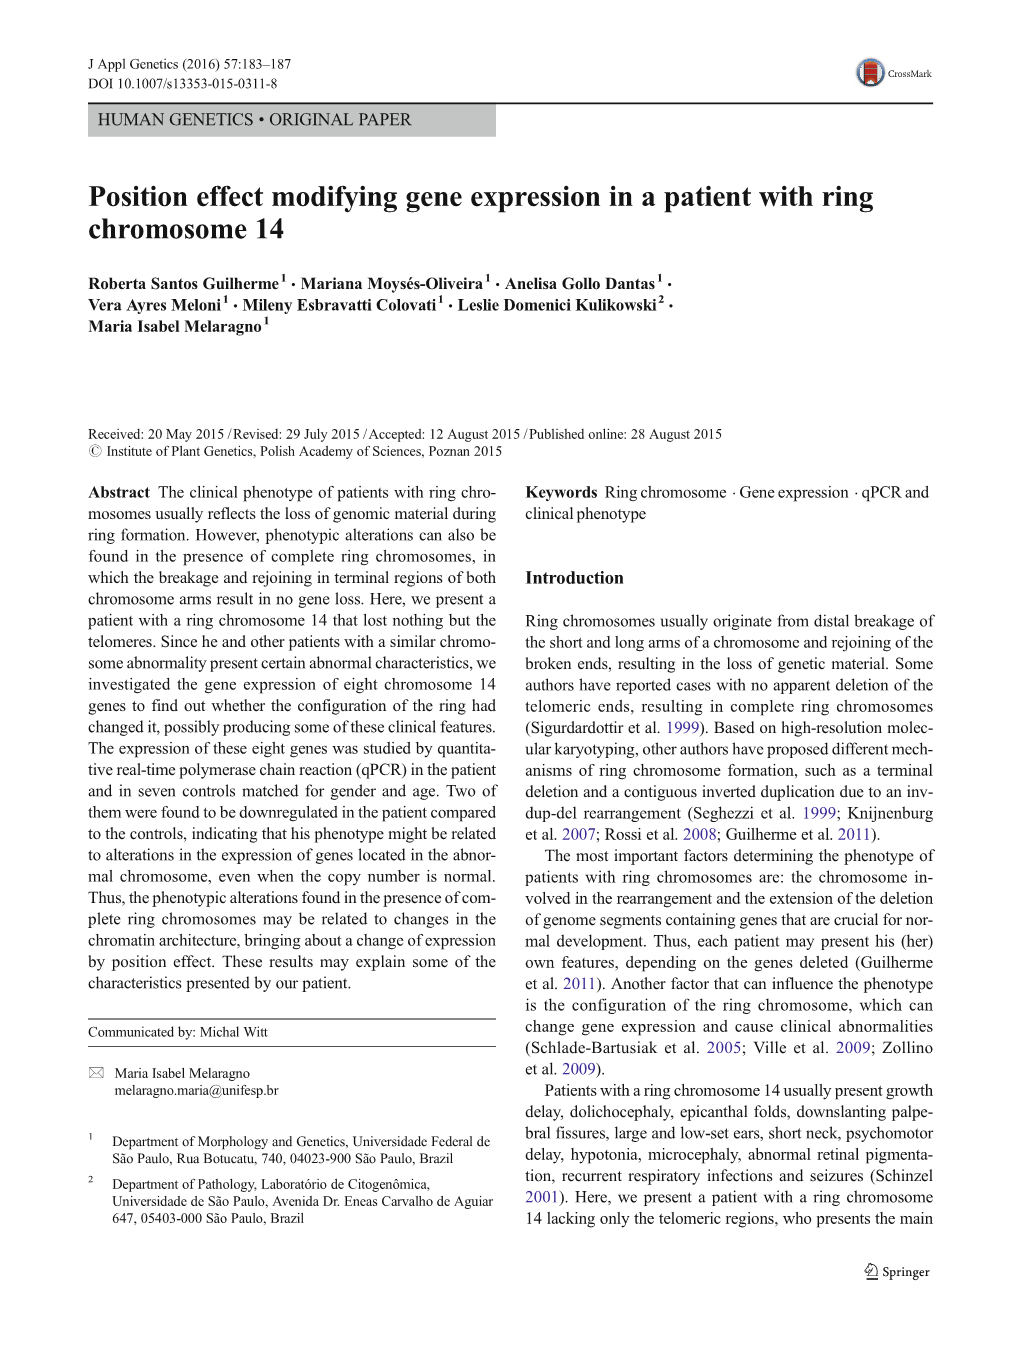 Position Effect Modifying Gene Expression in a Patient with Ring Chromosome 14